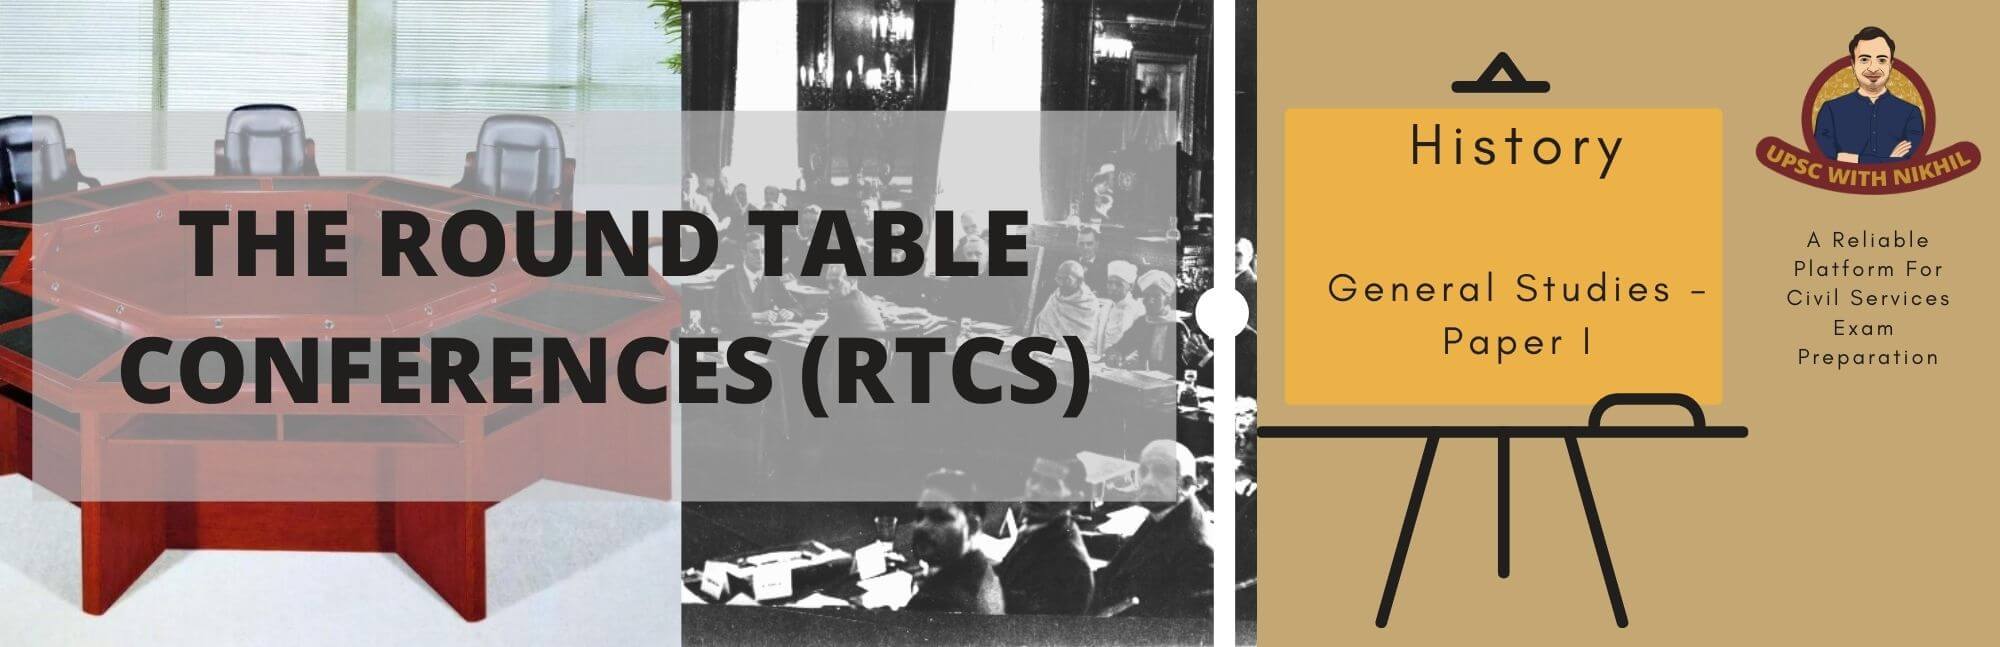 The Round Table Conferences Rtcs, Why Were The Three Round Table Conferences Held